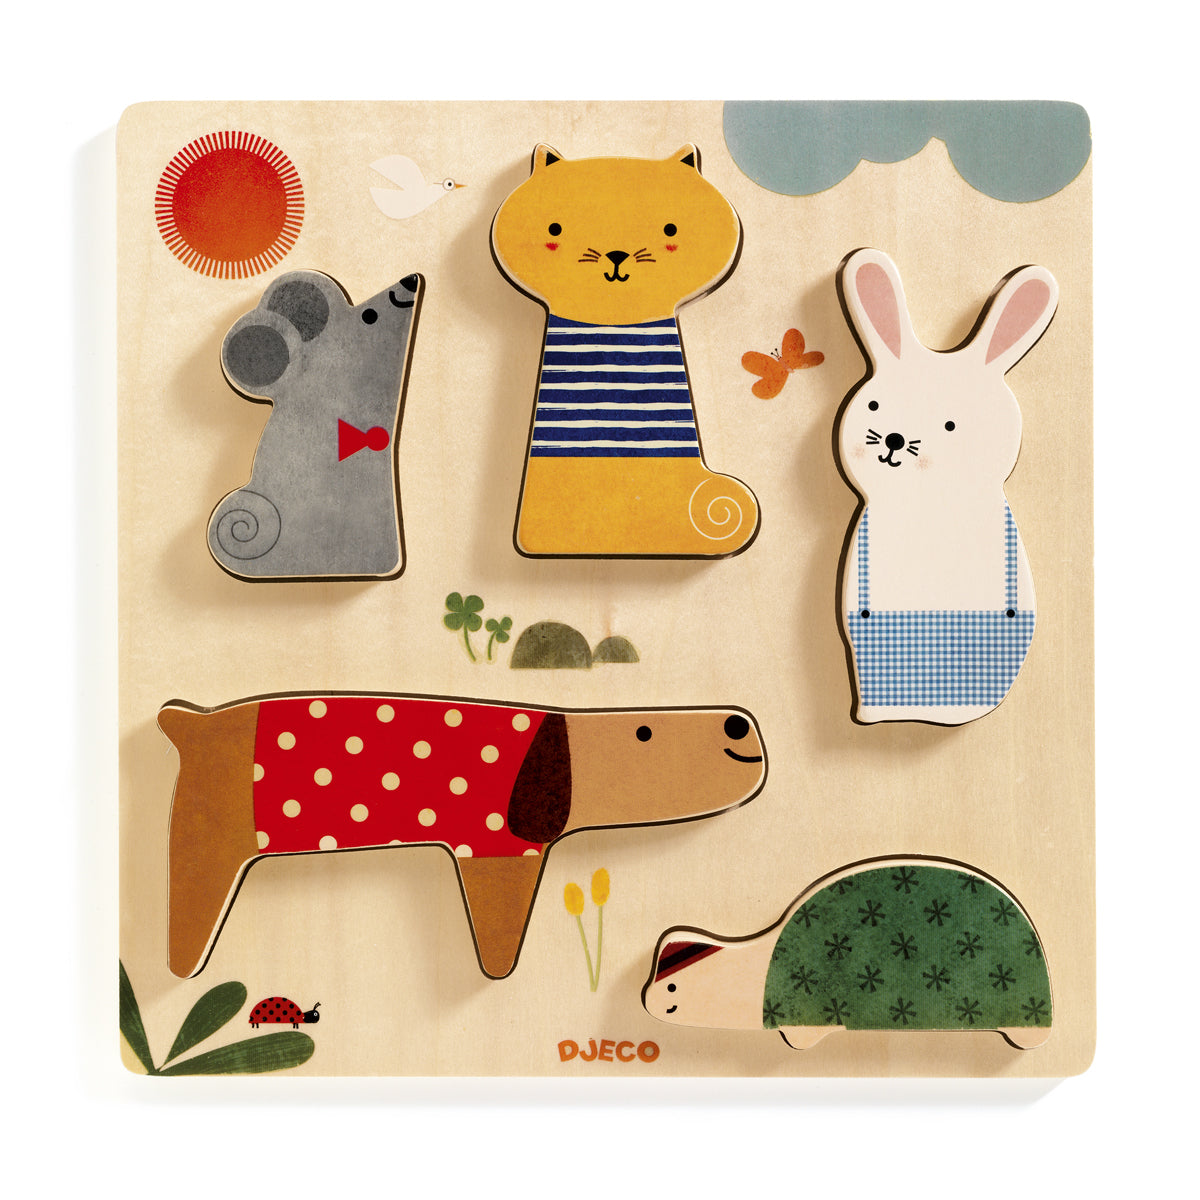 Woodypets wooden puzzle from Djeco with rabbit mouse cat dog snail